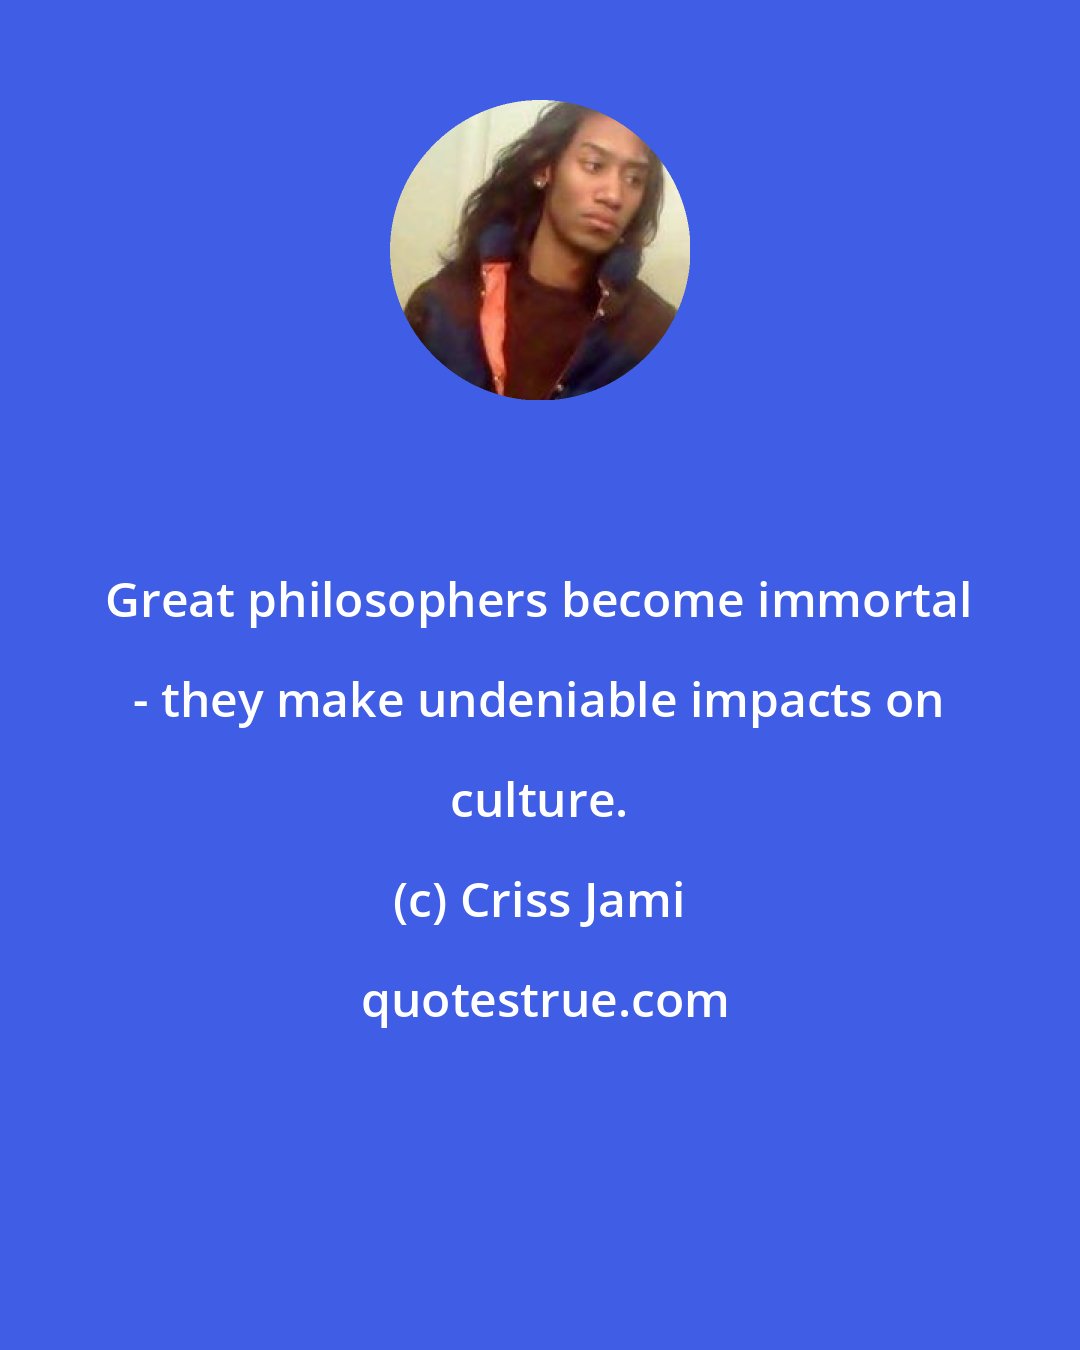 Criss Jami: Great philosophers become immortal - they make undeniable impacts on culture.